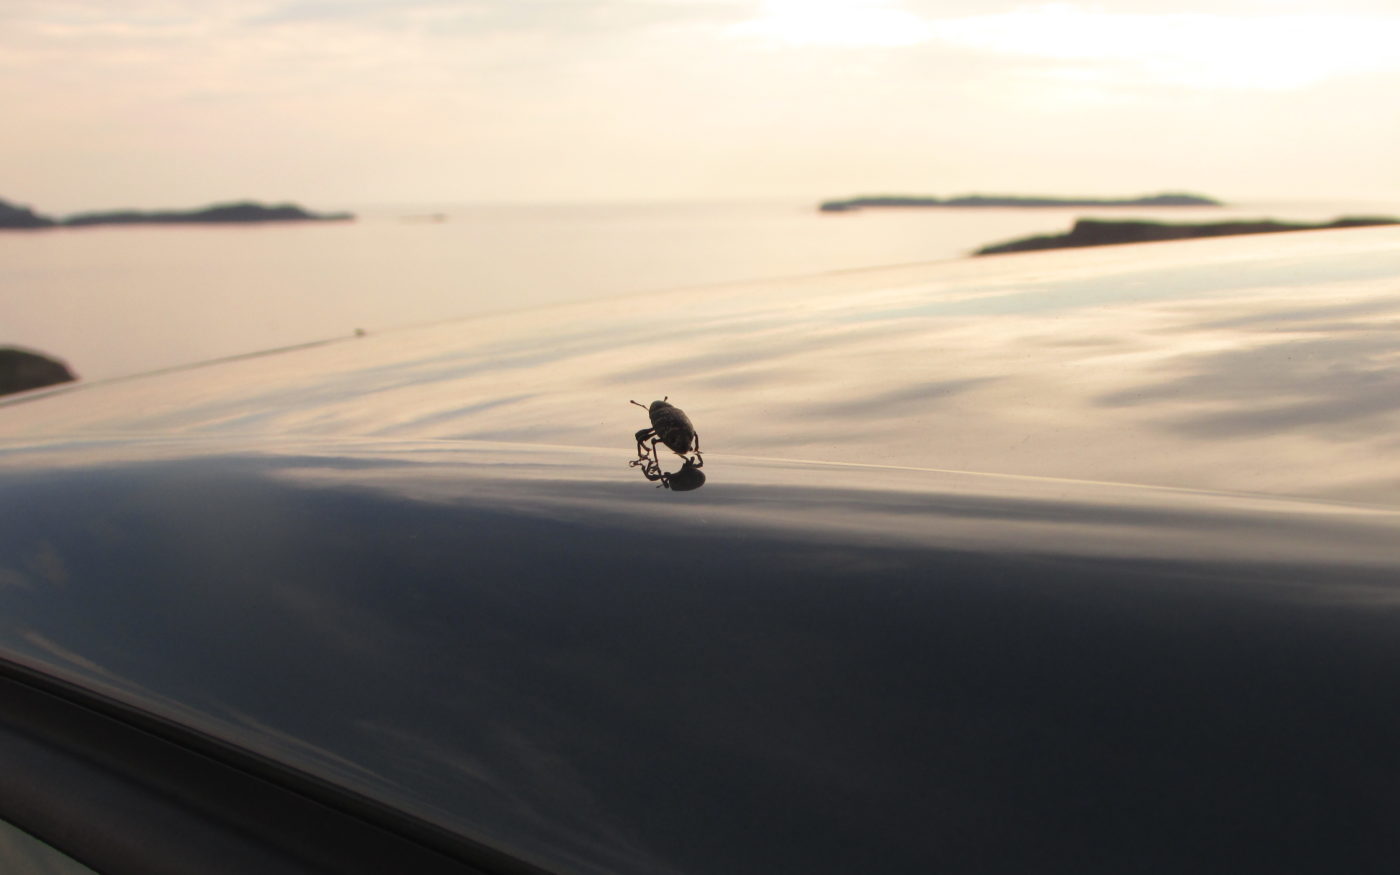 Beetle silhouetted against a shiny surface